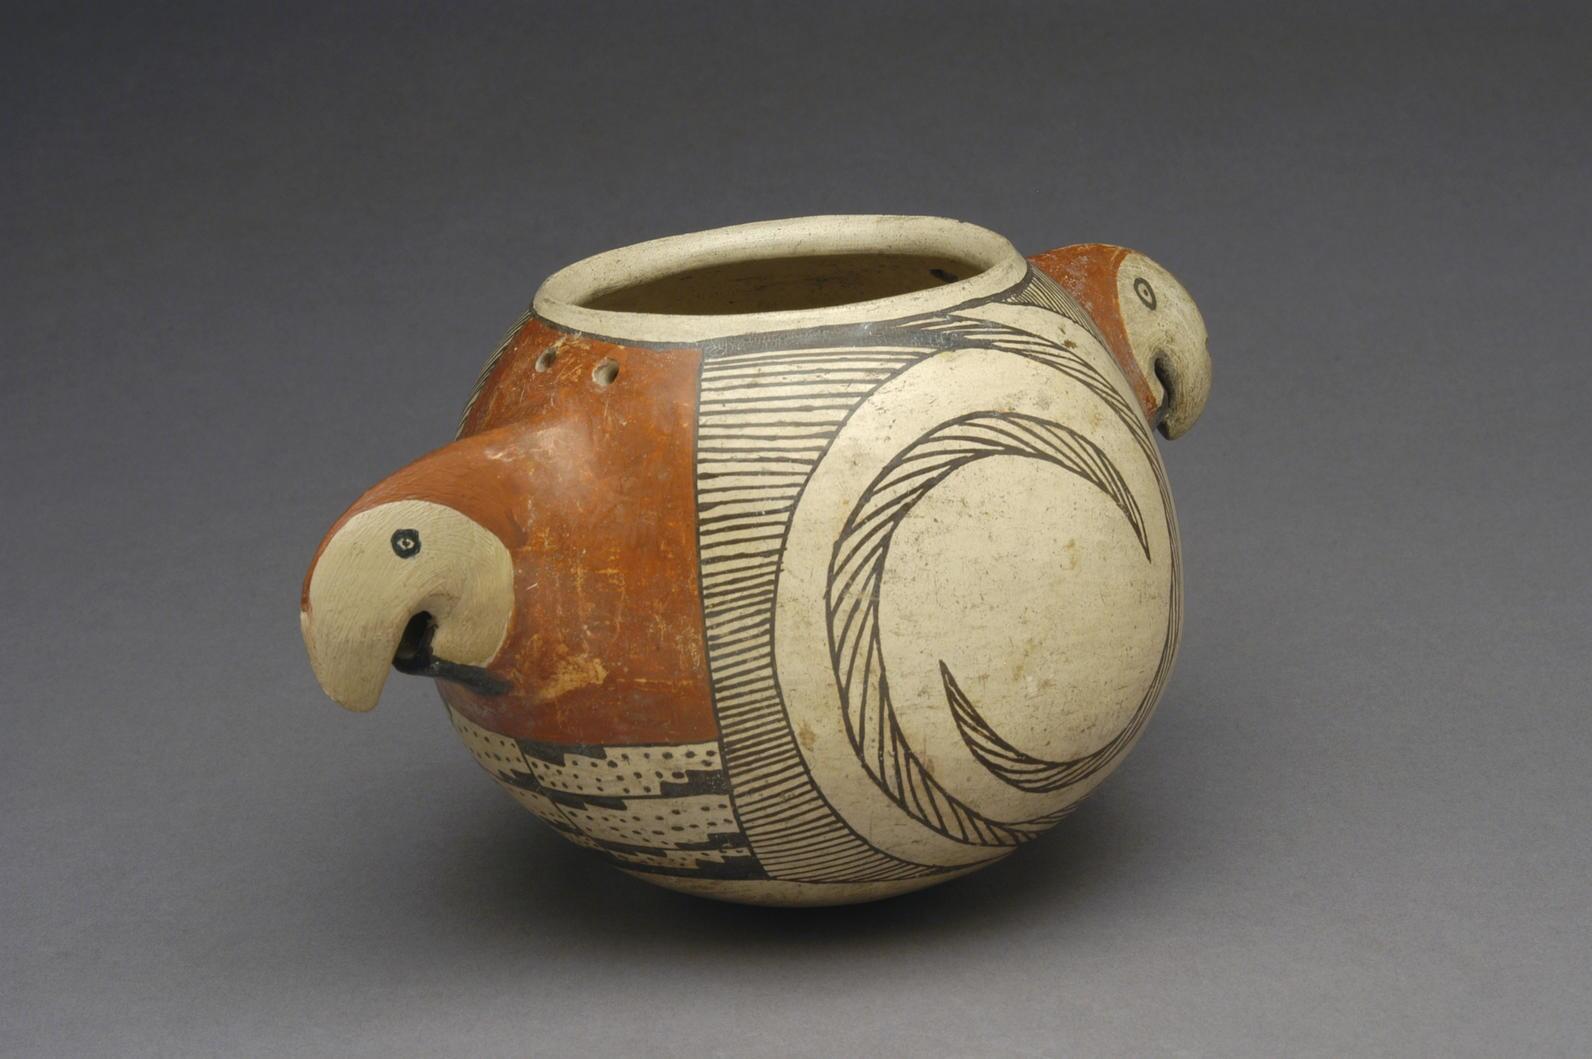 Collection of the New Mexico Museum of Indian Arts and Culture